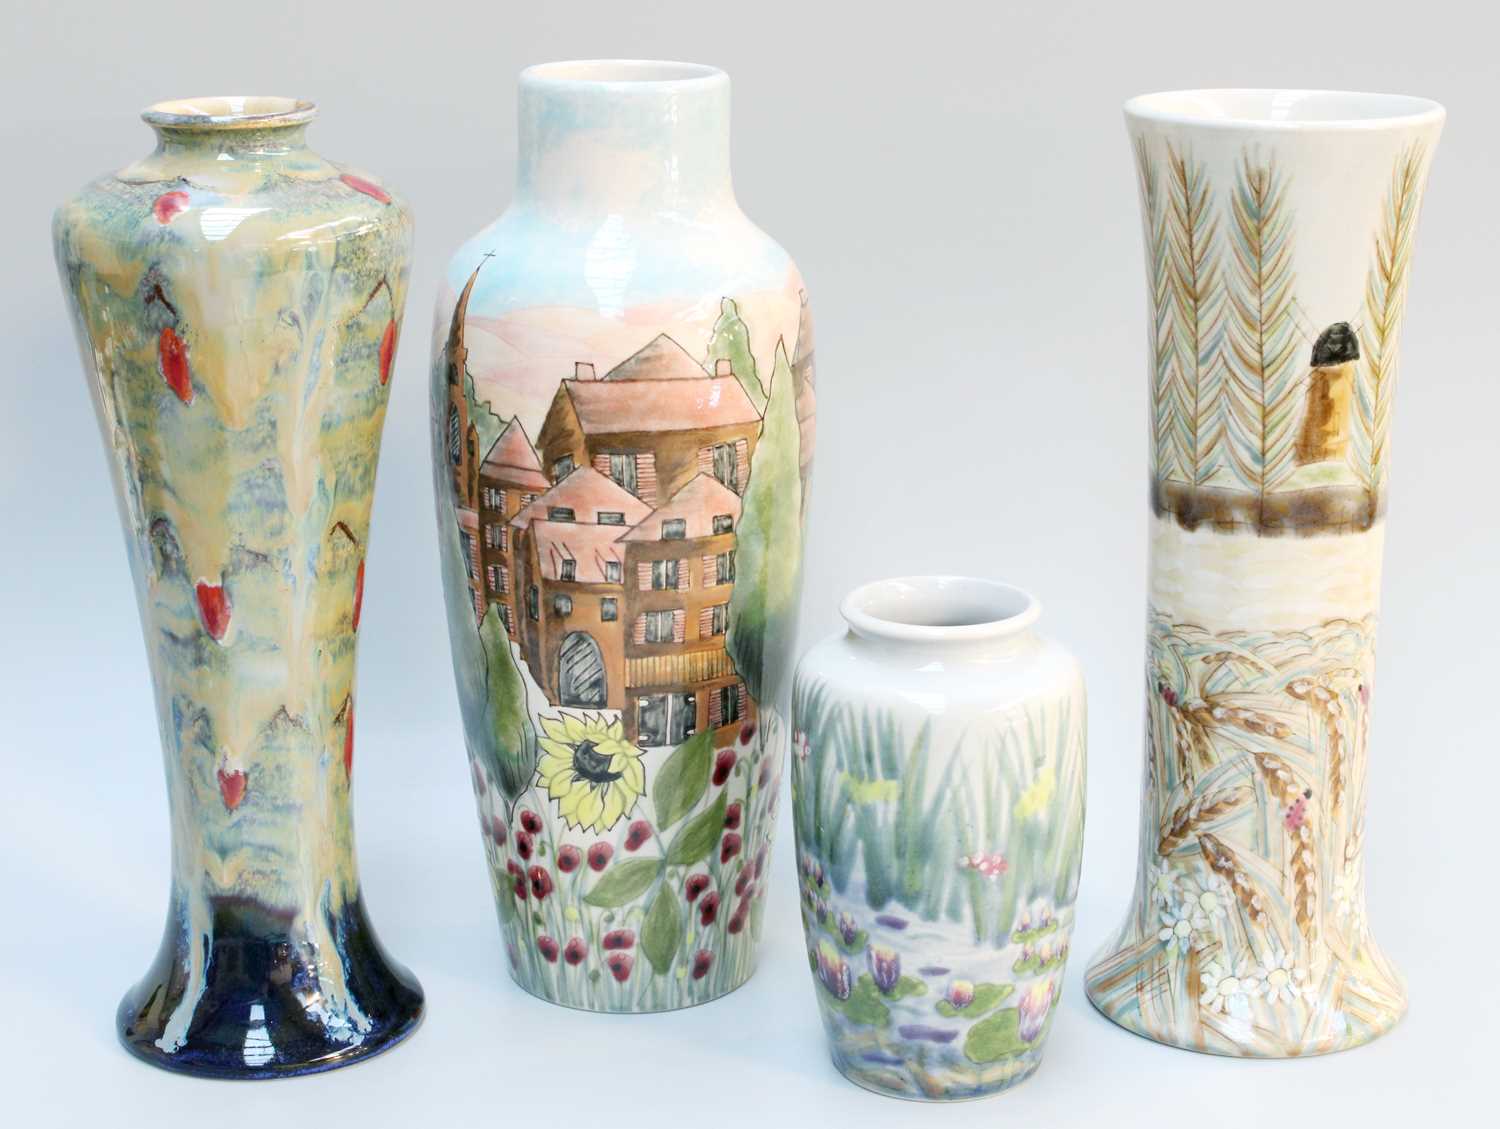 Four Cobridge Vases, including 'Lower Harts' Windmill pattern by Rachel Bishop, and another by Anita